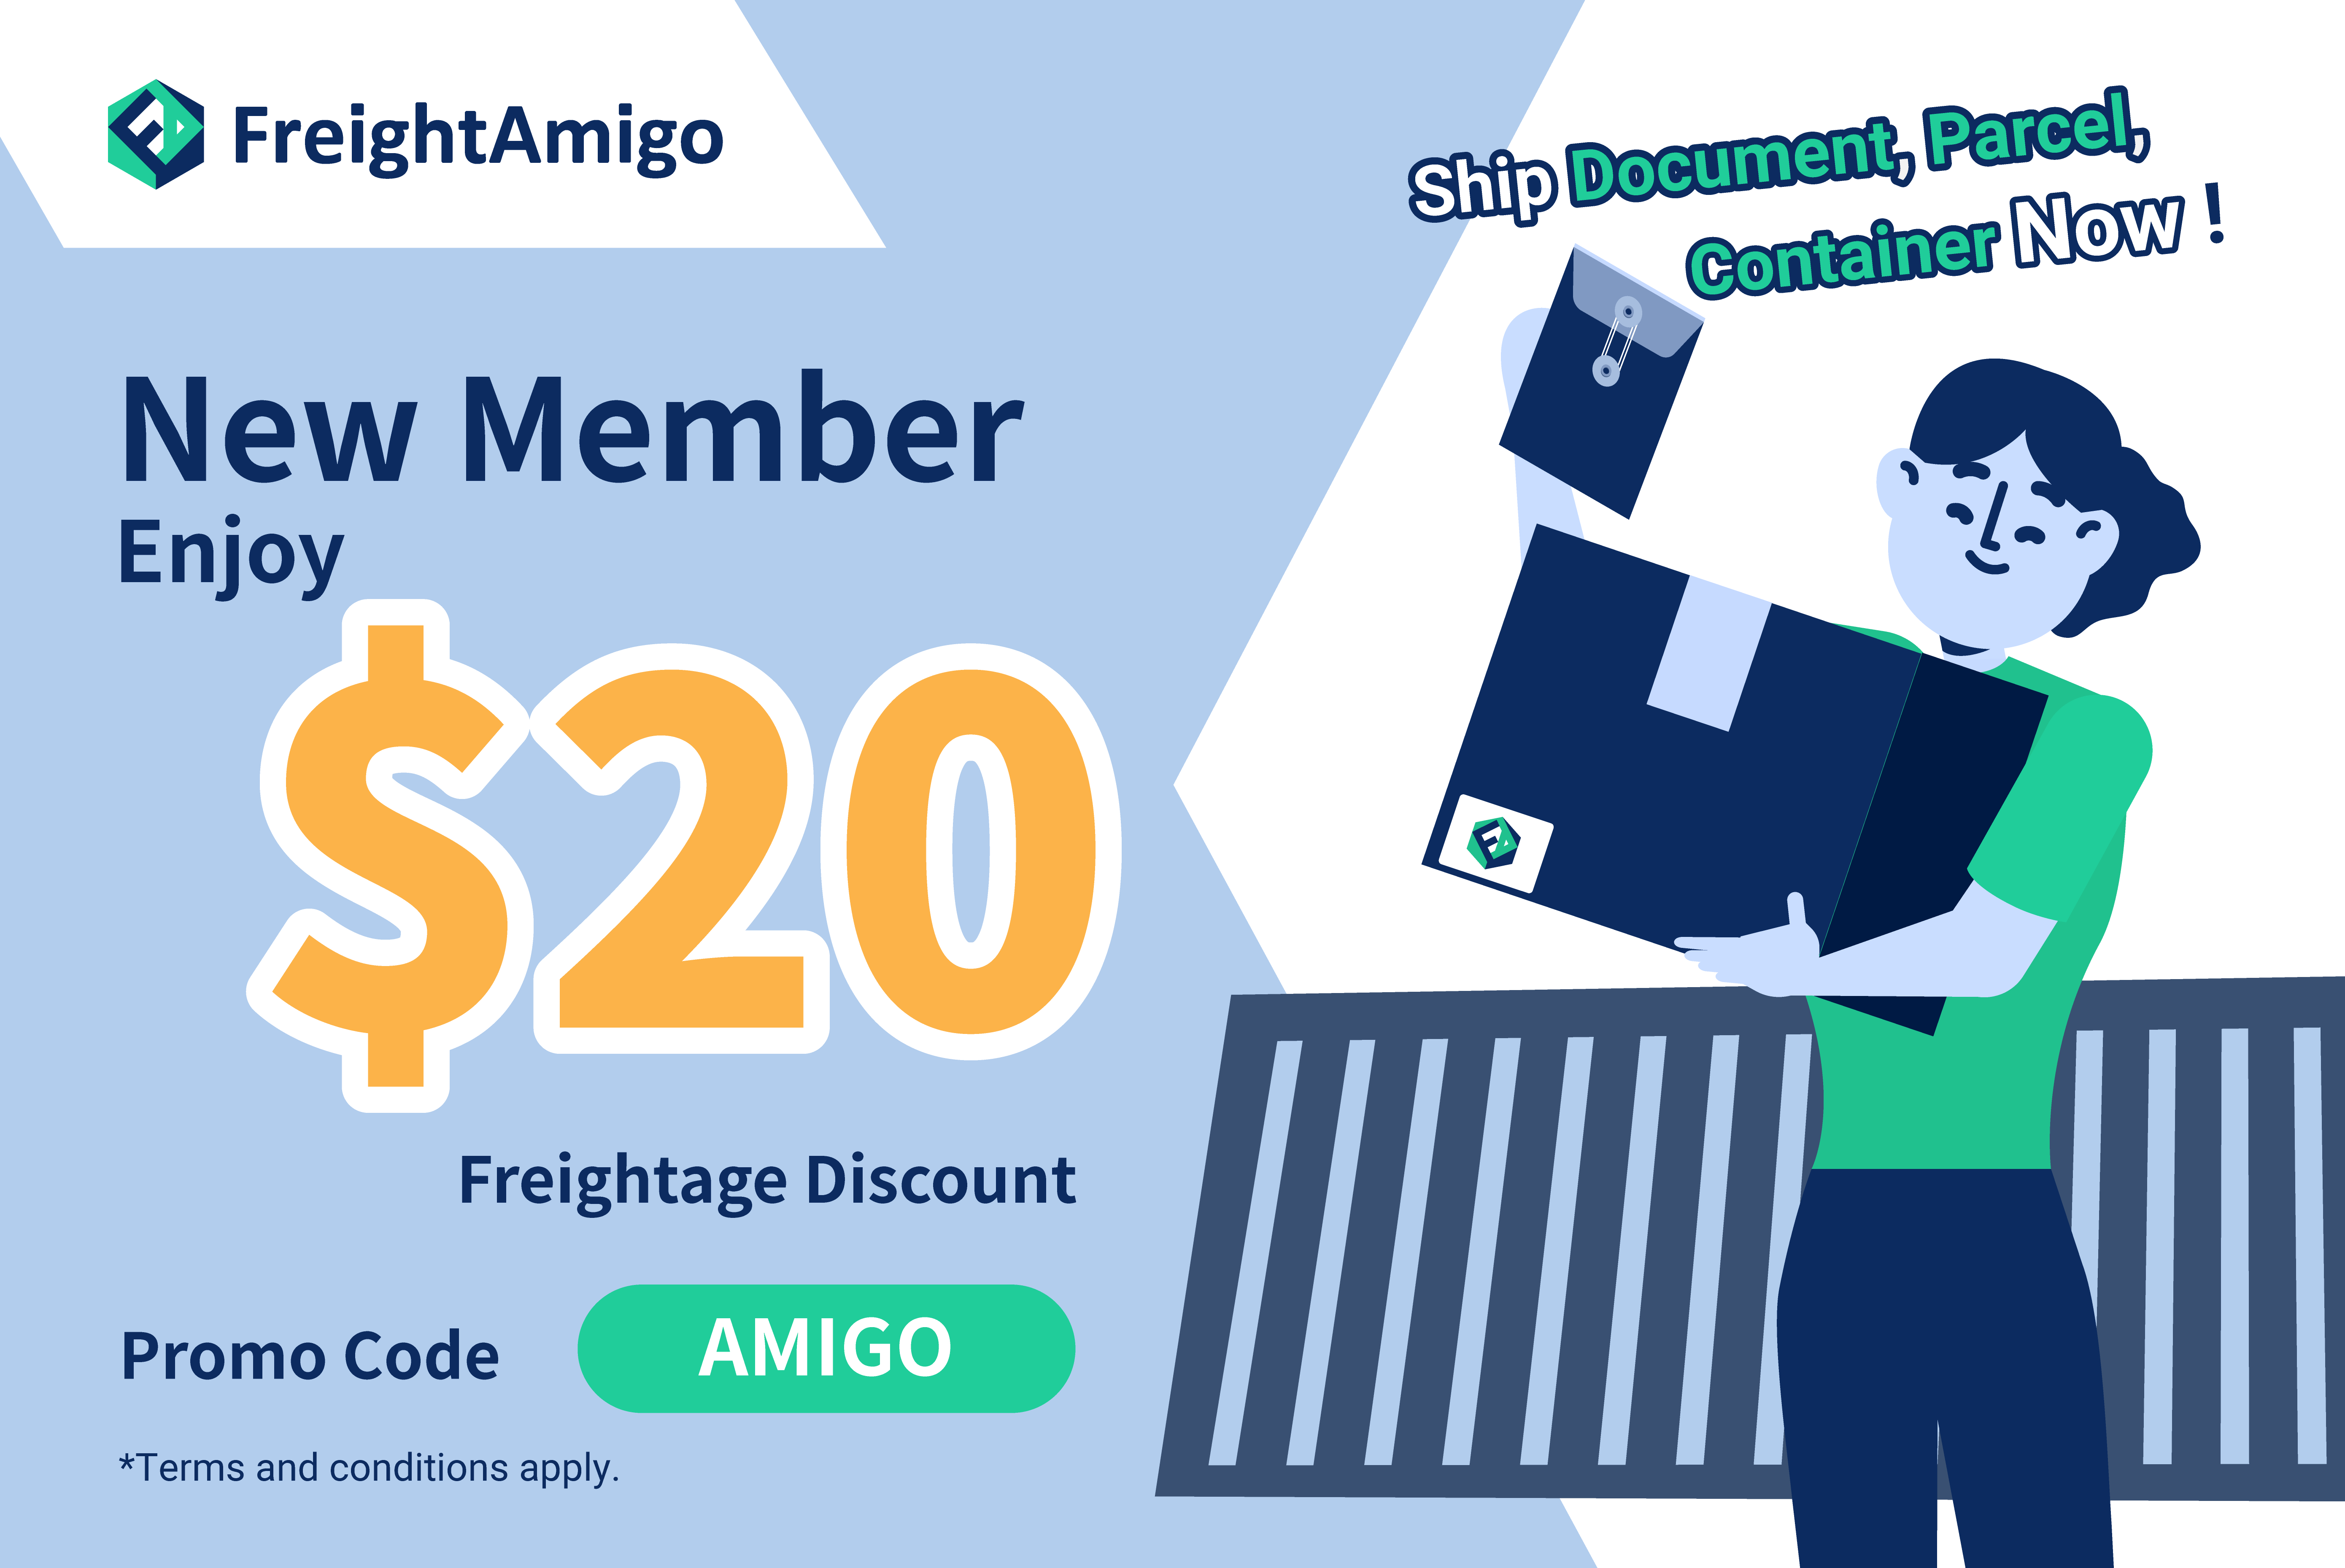 【New Member Offer】Enjoy $20 Freightage Discount